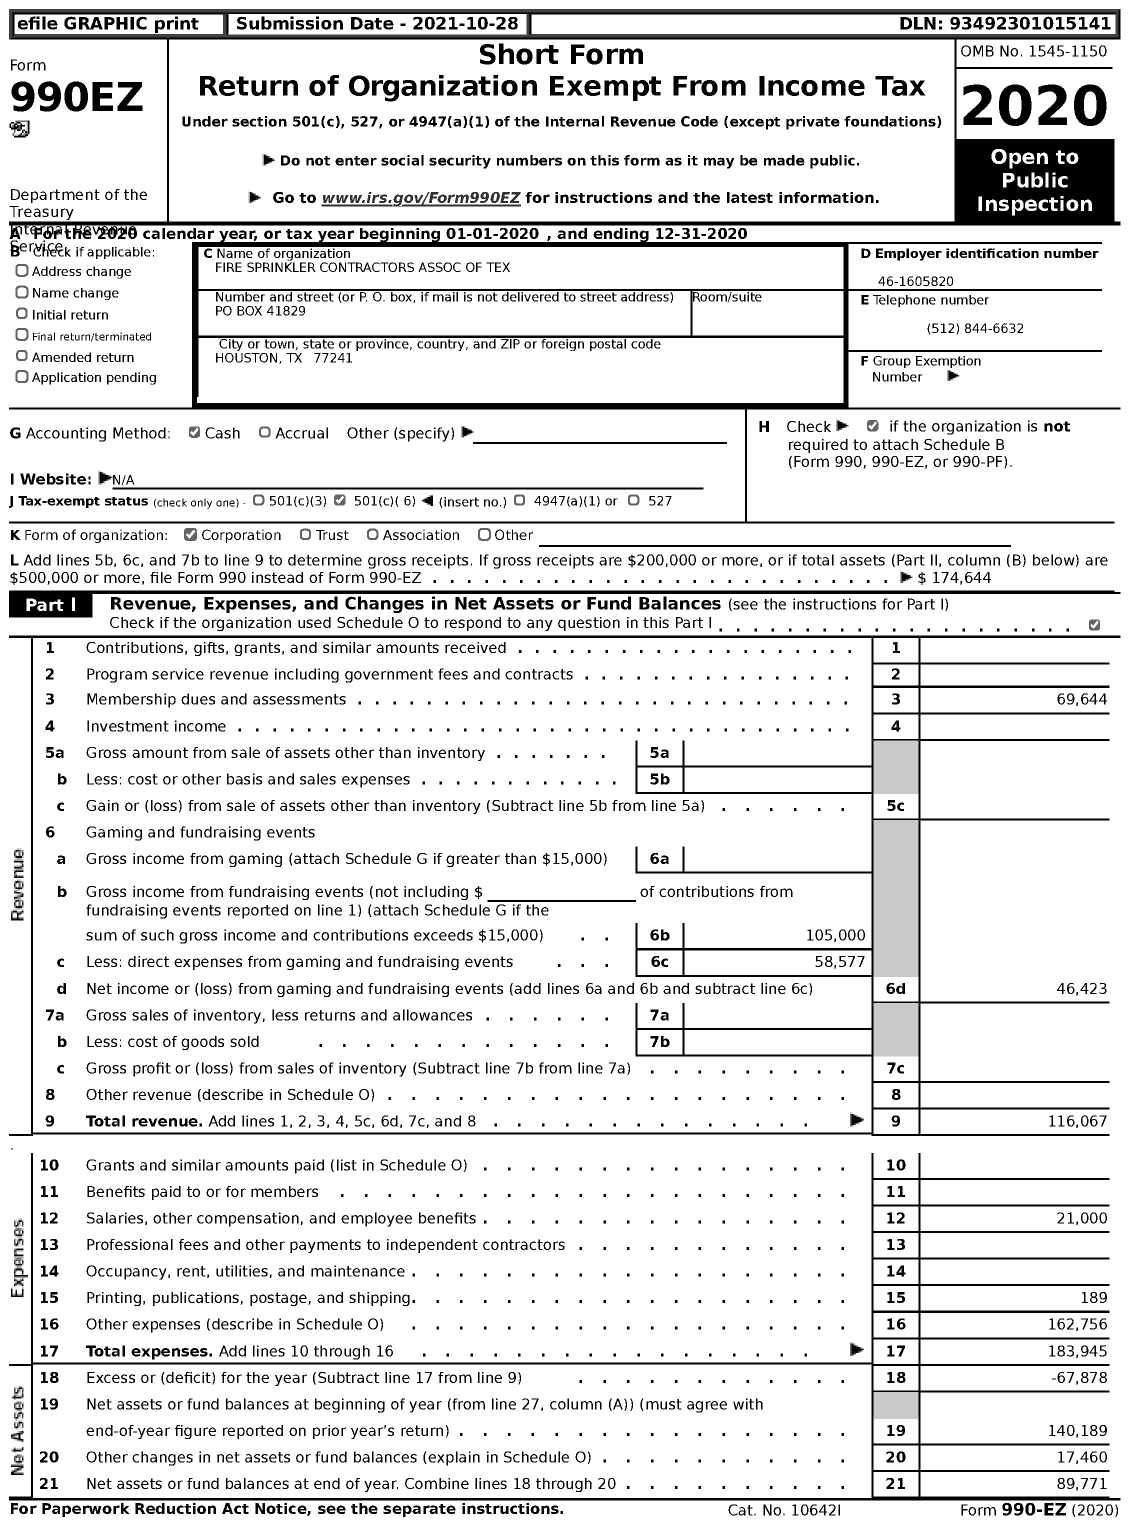 Image of first page of 2020 Form 990EZ for Fire Sprinkler Contractors Association of Tex